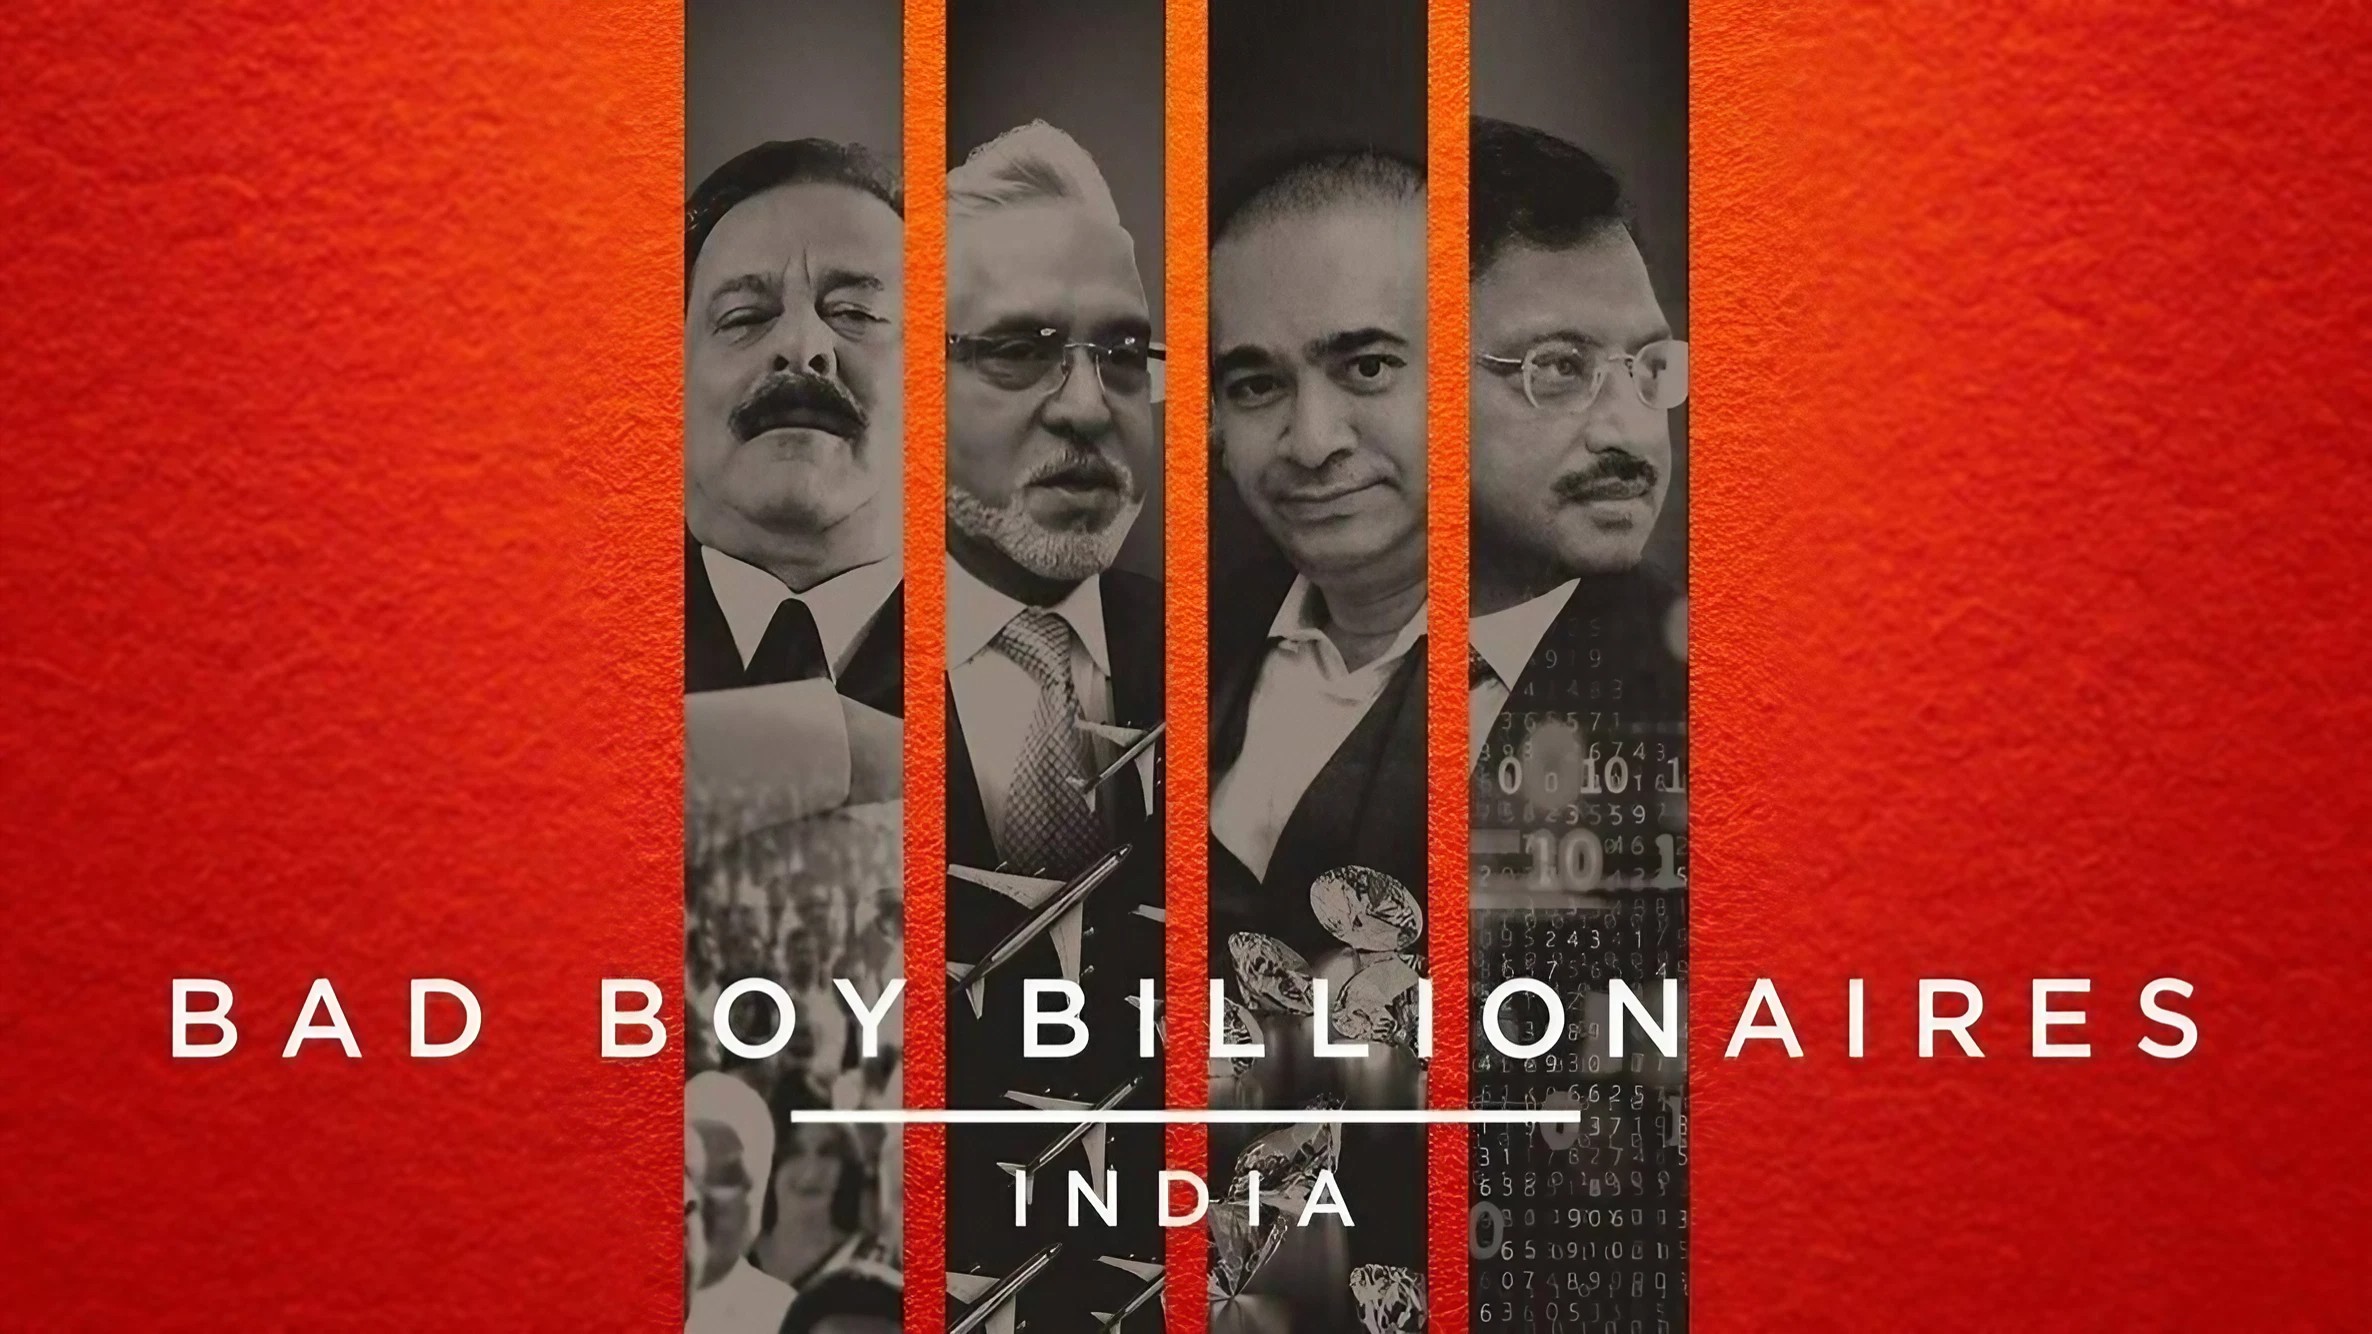 Is Bad Boy Billionaires: India Based On A True Story?